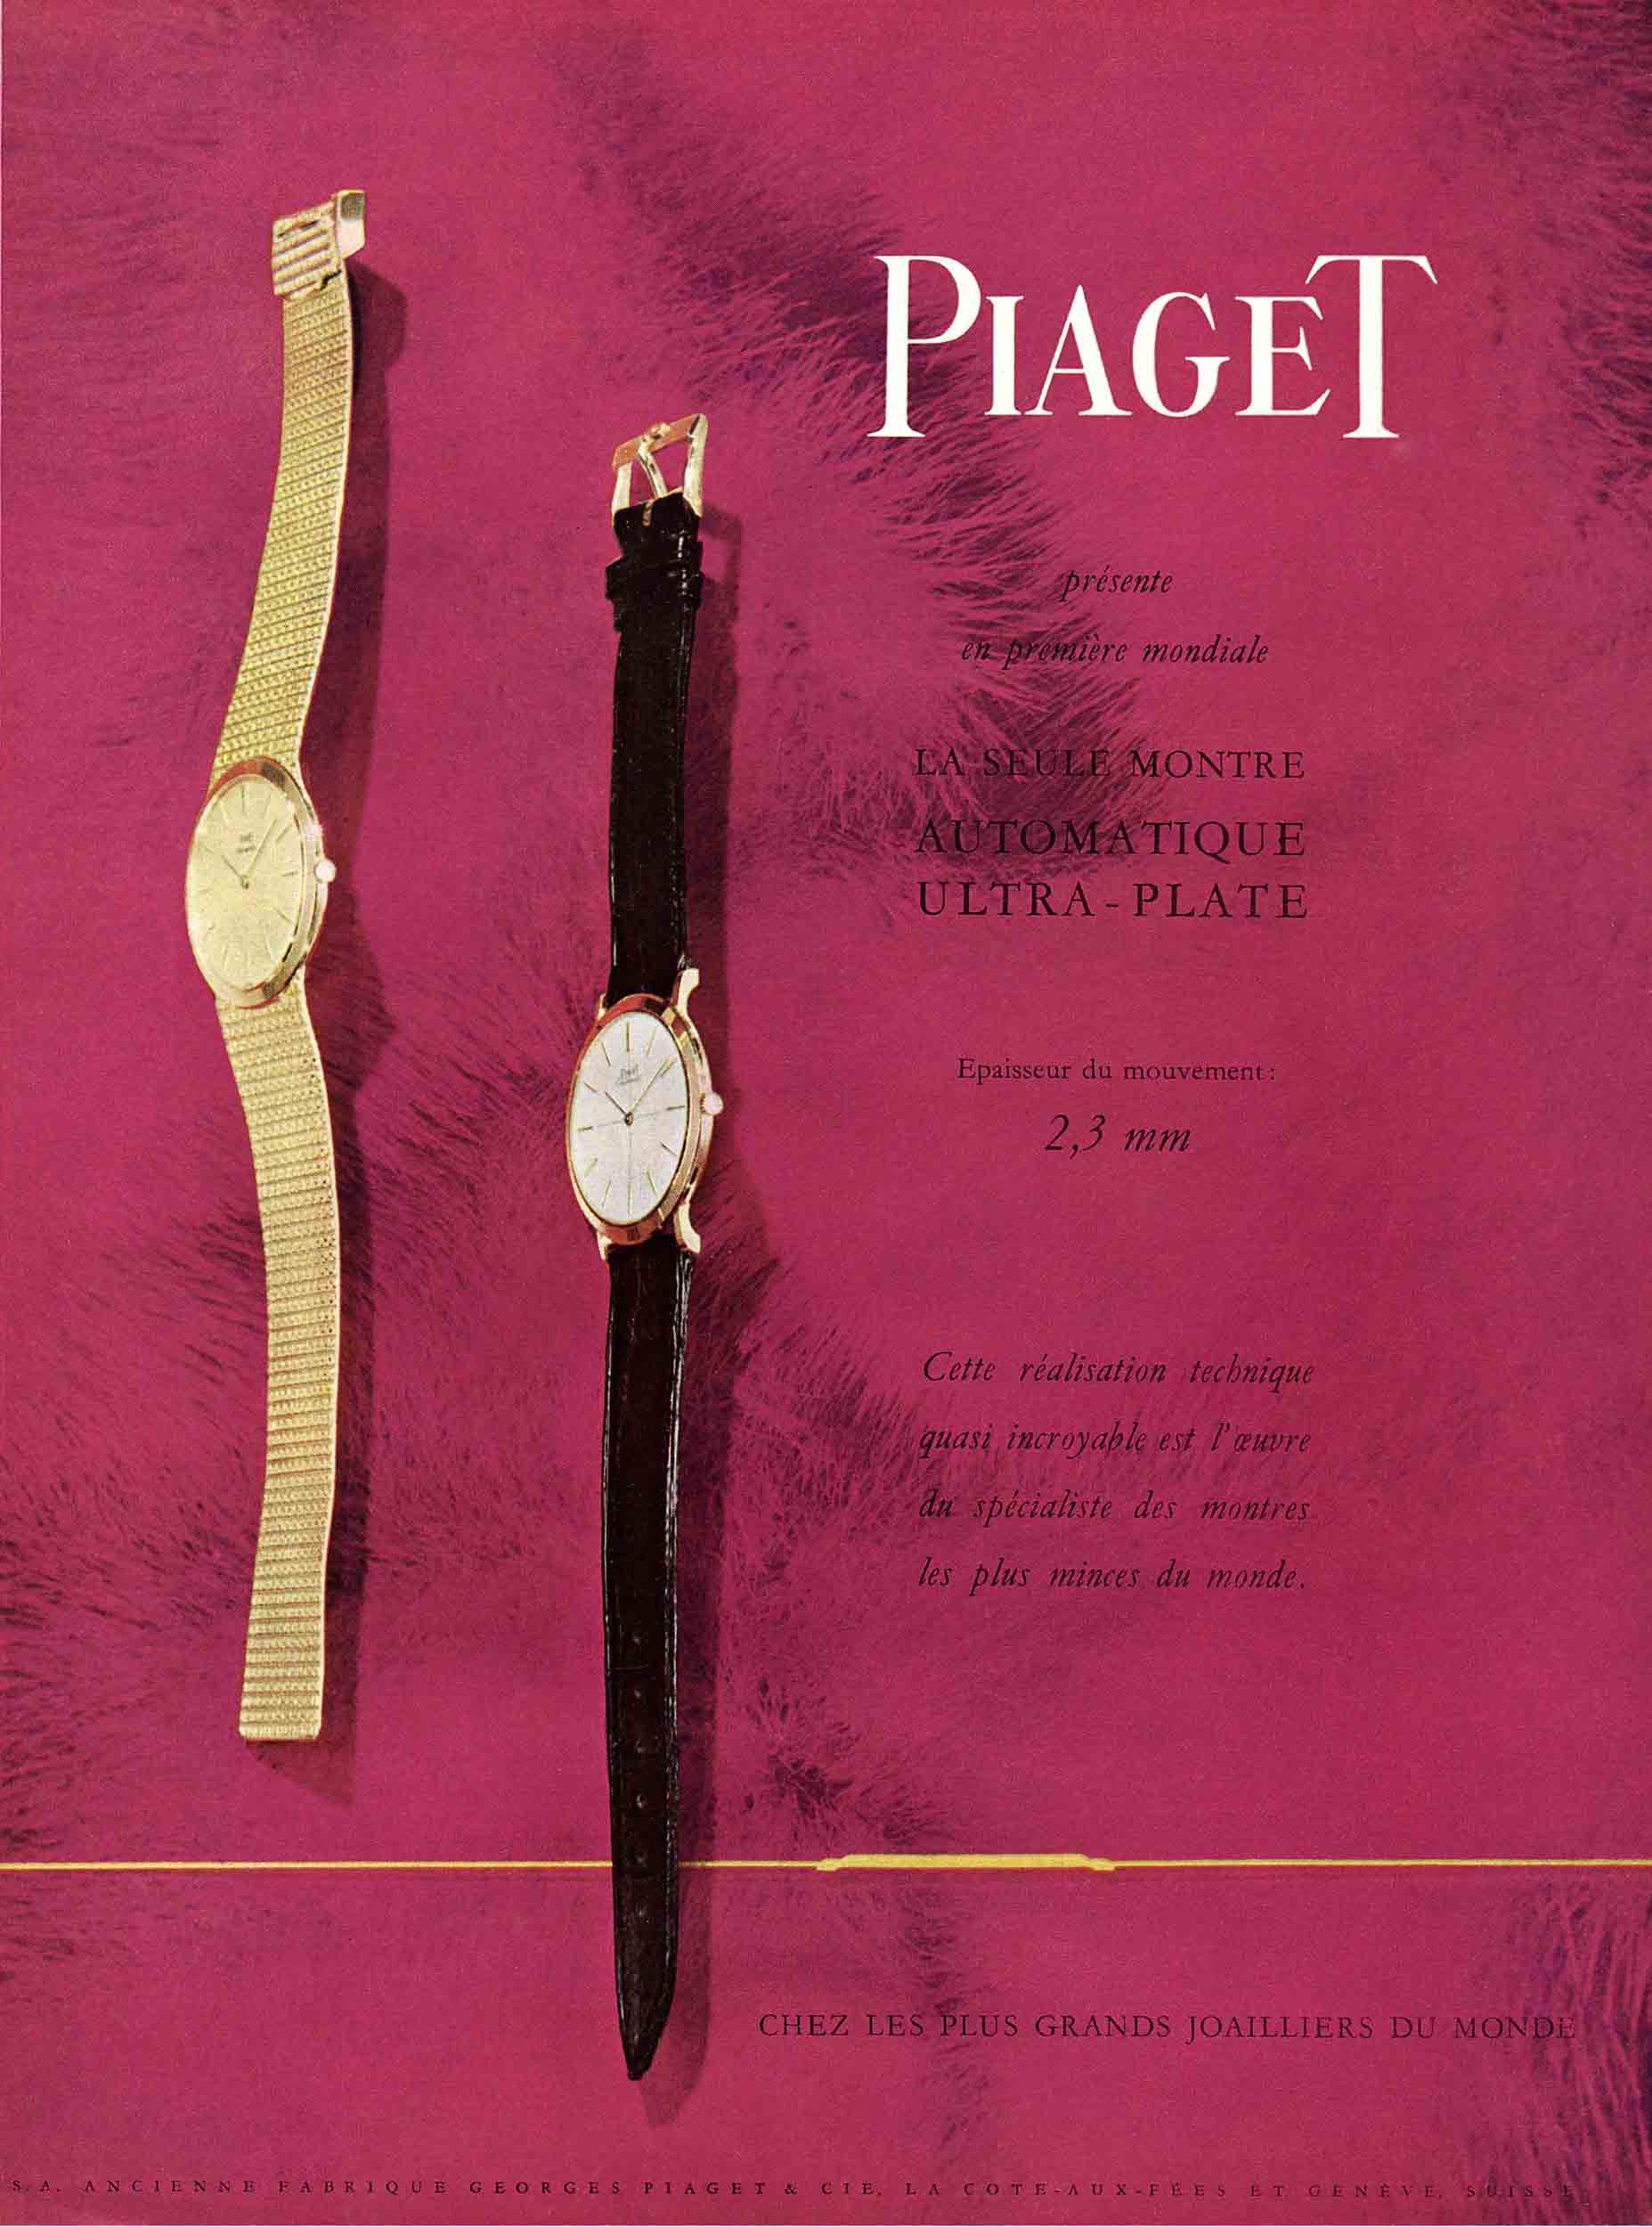 Travel back in time with Piaget 9